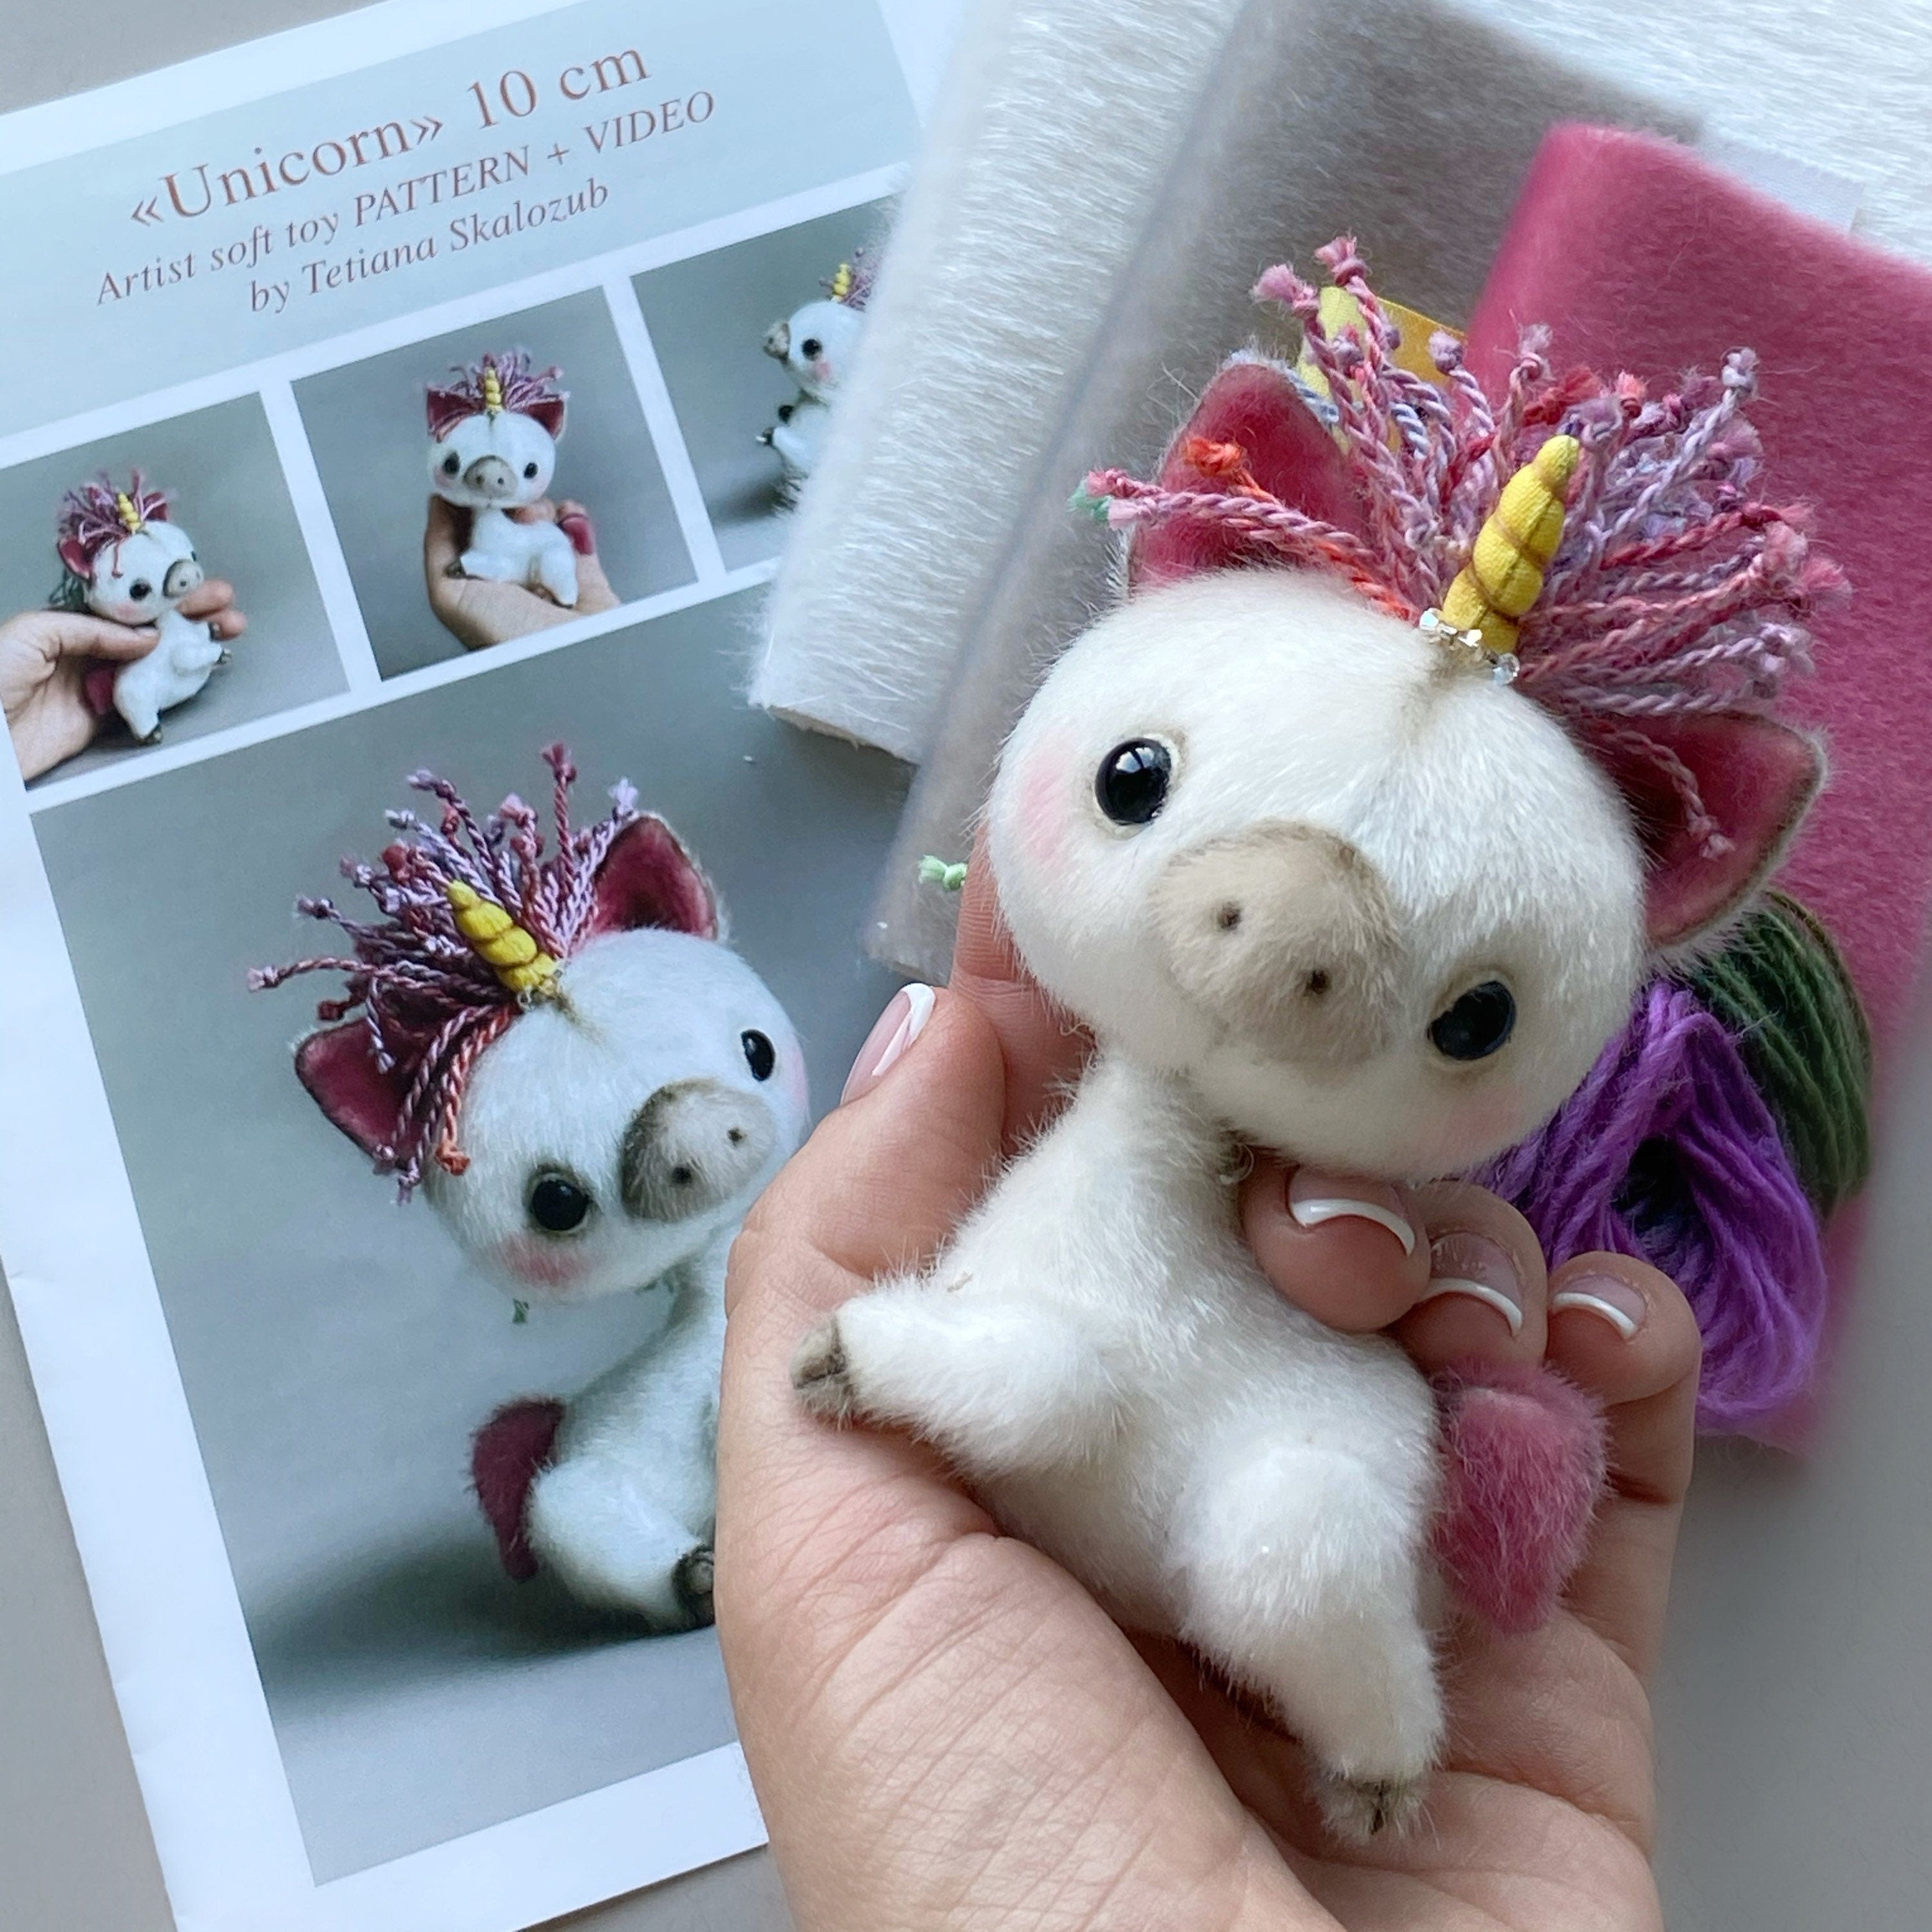 Unicorn - Sewing KIT, stuffed toy unicorn diy, gift for creative person, sewing pattern and materials, how to make a toy video tutorials